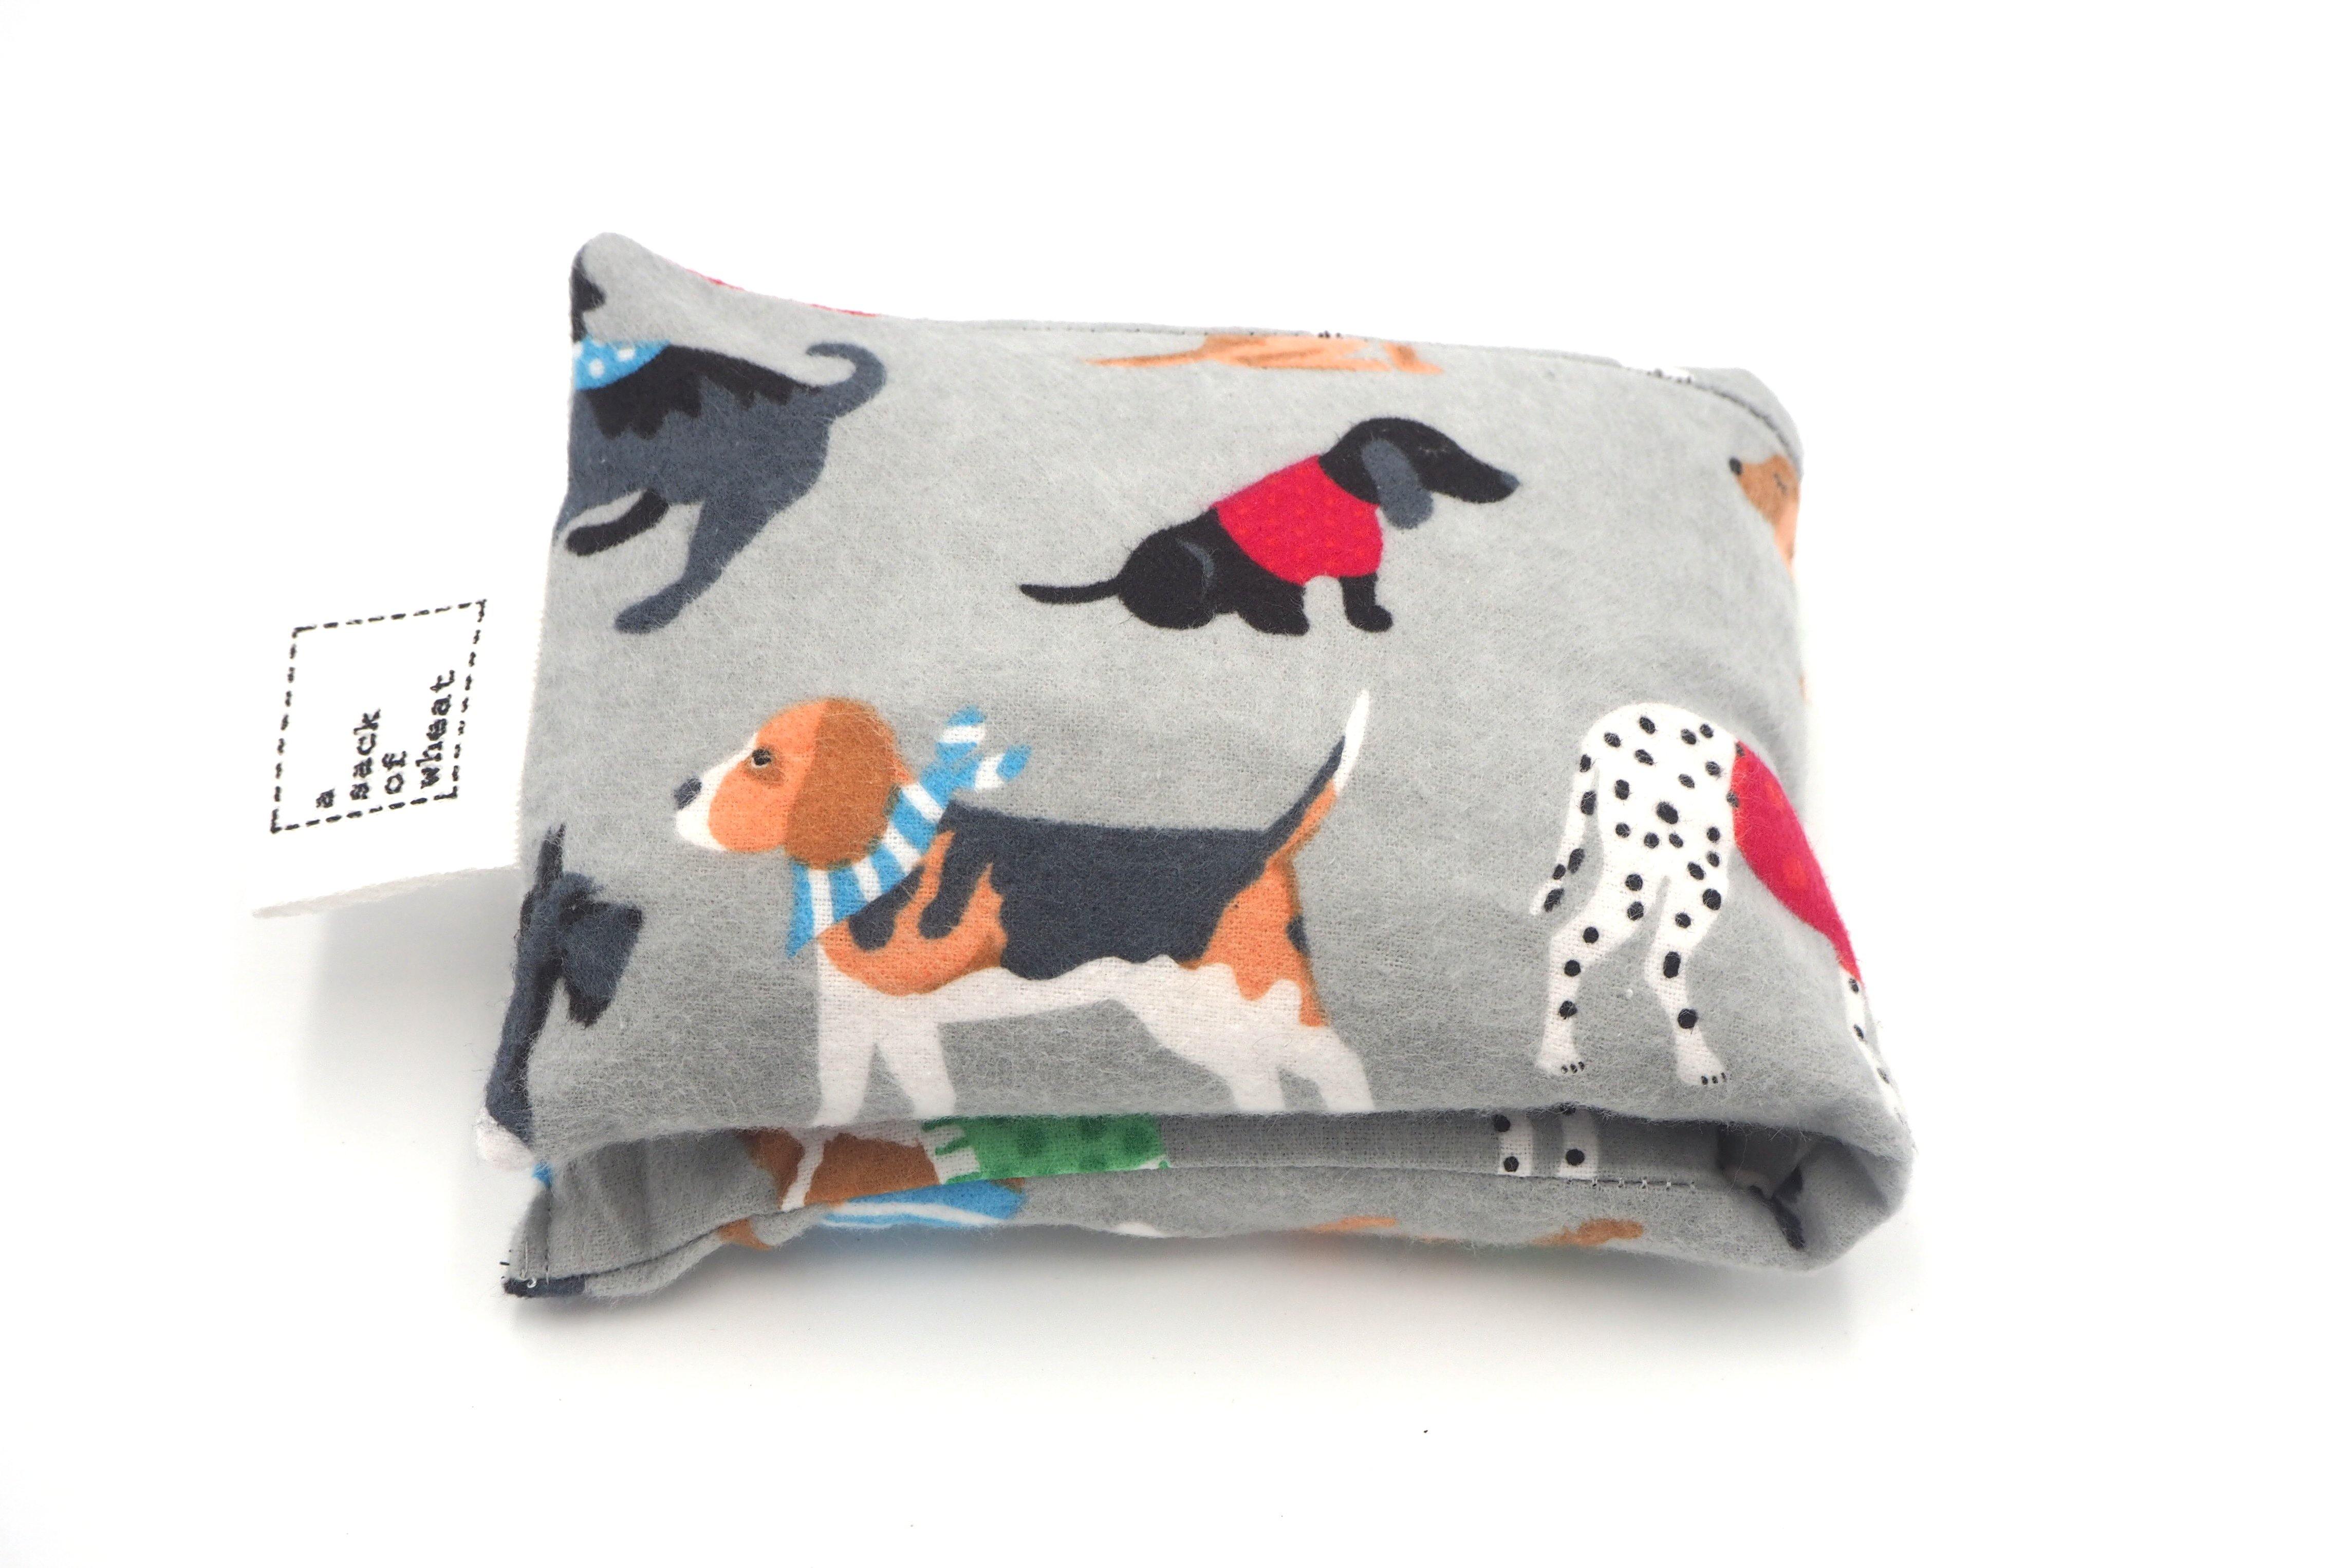 Folded view of A Sack Of Wheat, featuring Dressed Up Hound Dogs print on soft & fluffy grey flannelette, 100% cotton fabric